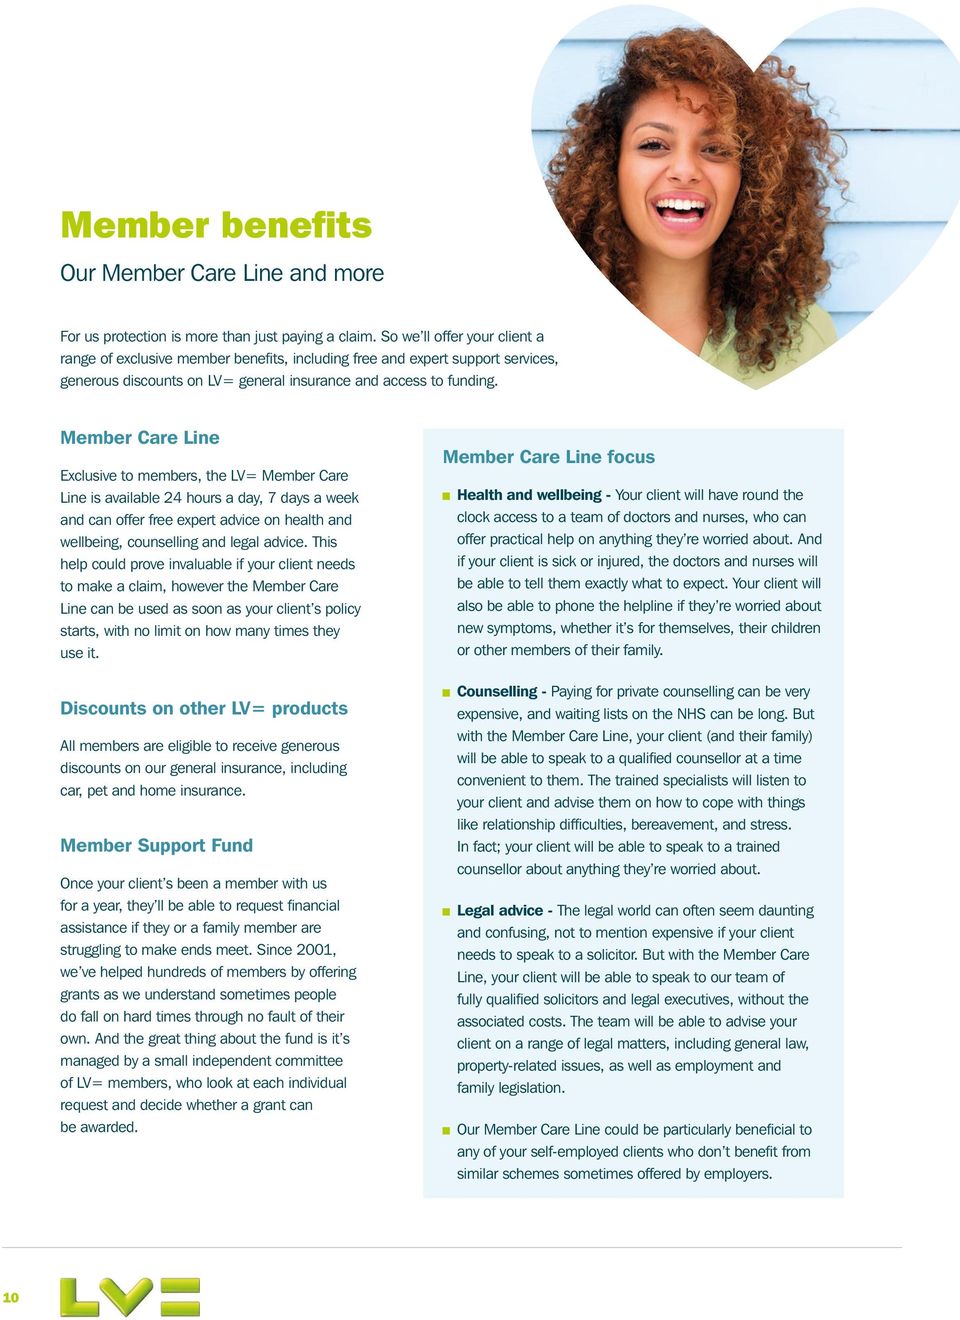 Member Care Line Exclusive to members, the LV= Member Care Line is available 24 hours a day, 7 days a week and can offer free expert advice on health and wellbeing, counselling and legal advice.